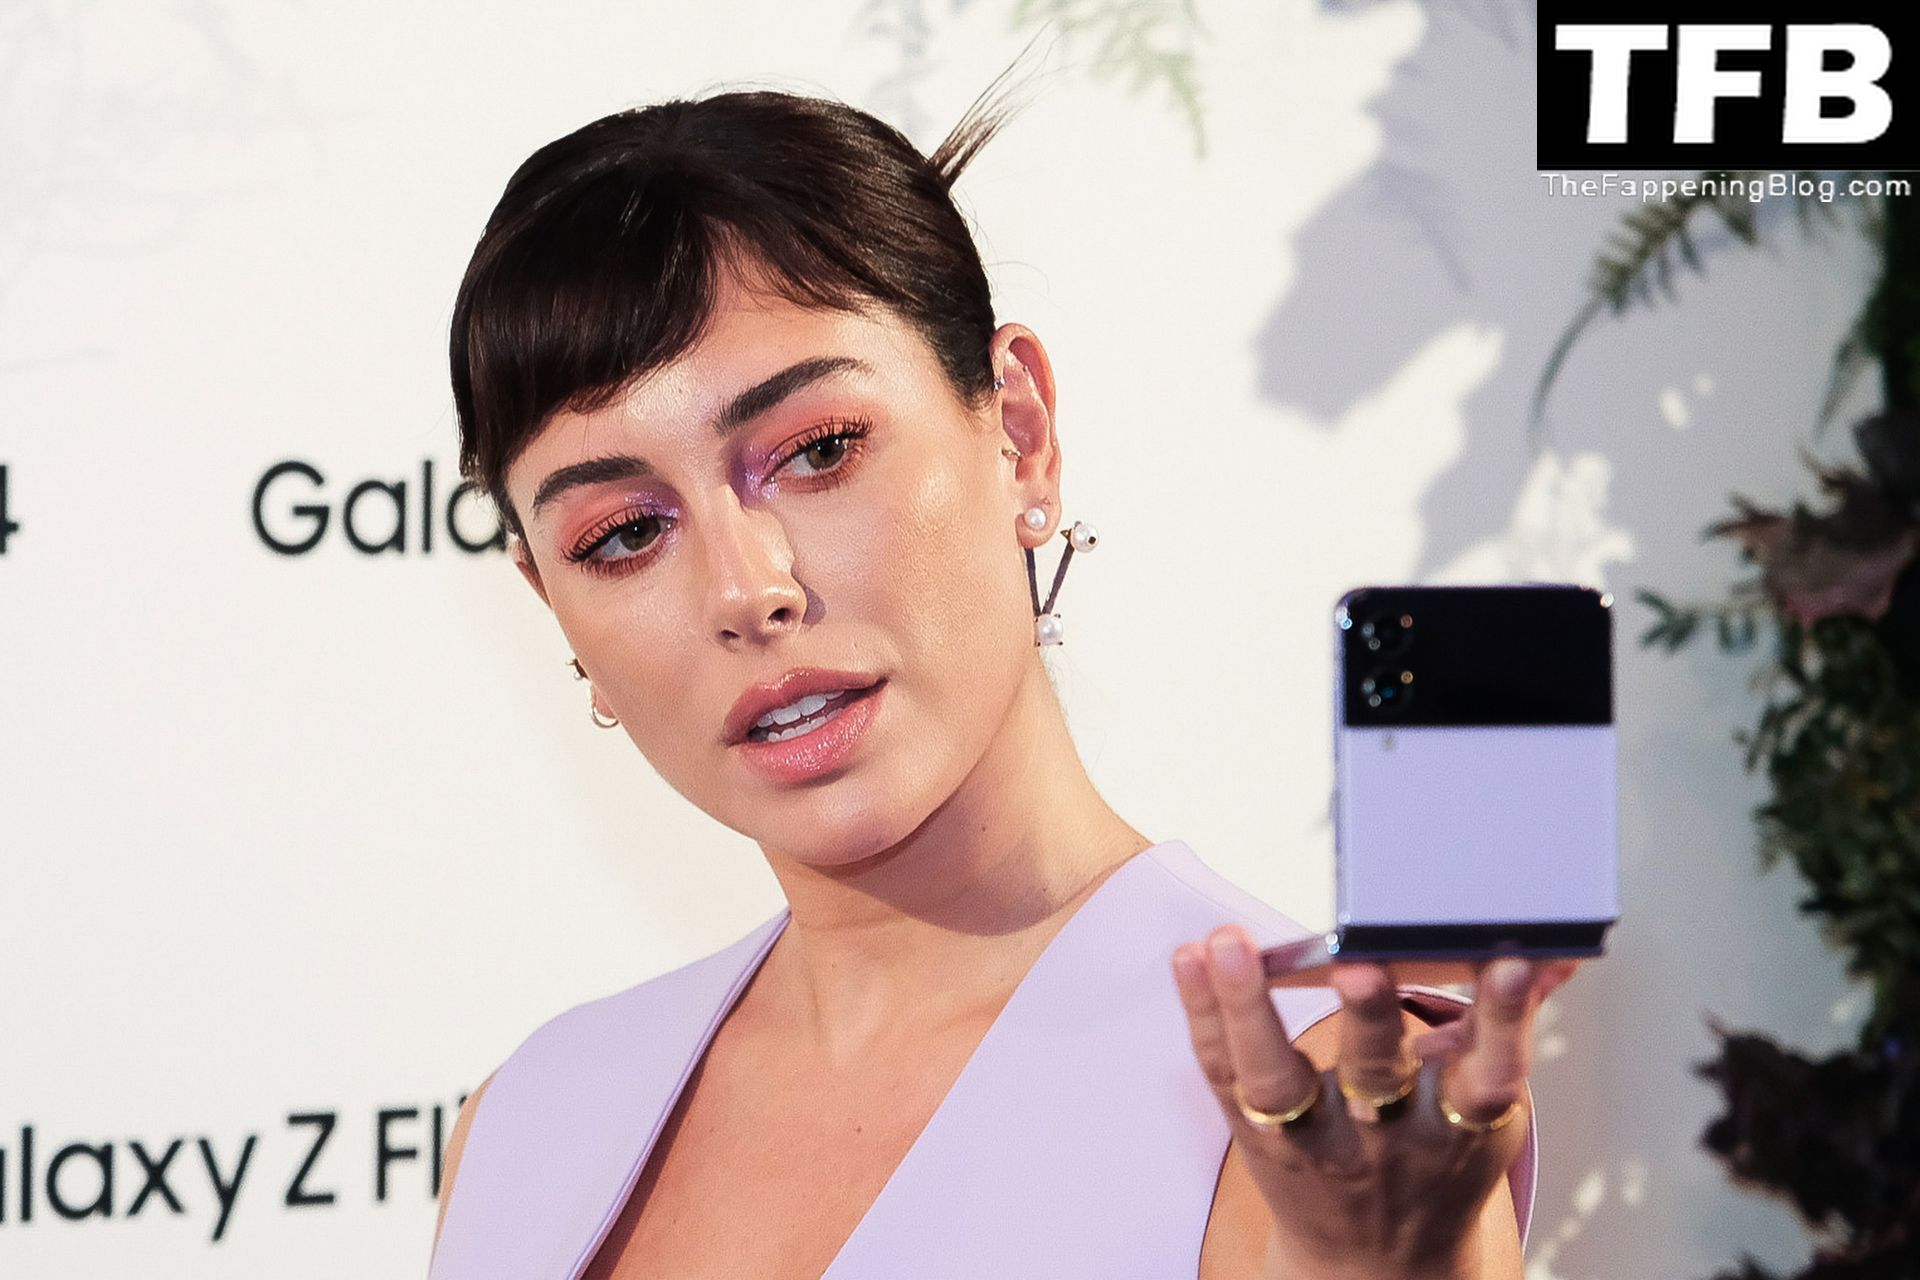 Blanca Suárez Sexy The Fappening Blog 2 - Blanca Suárez Displays Her Sexy Tits at the Presentation of the New Samsung in Madrid (13 Photos)